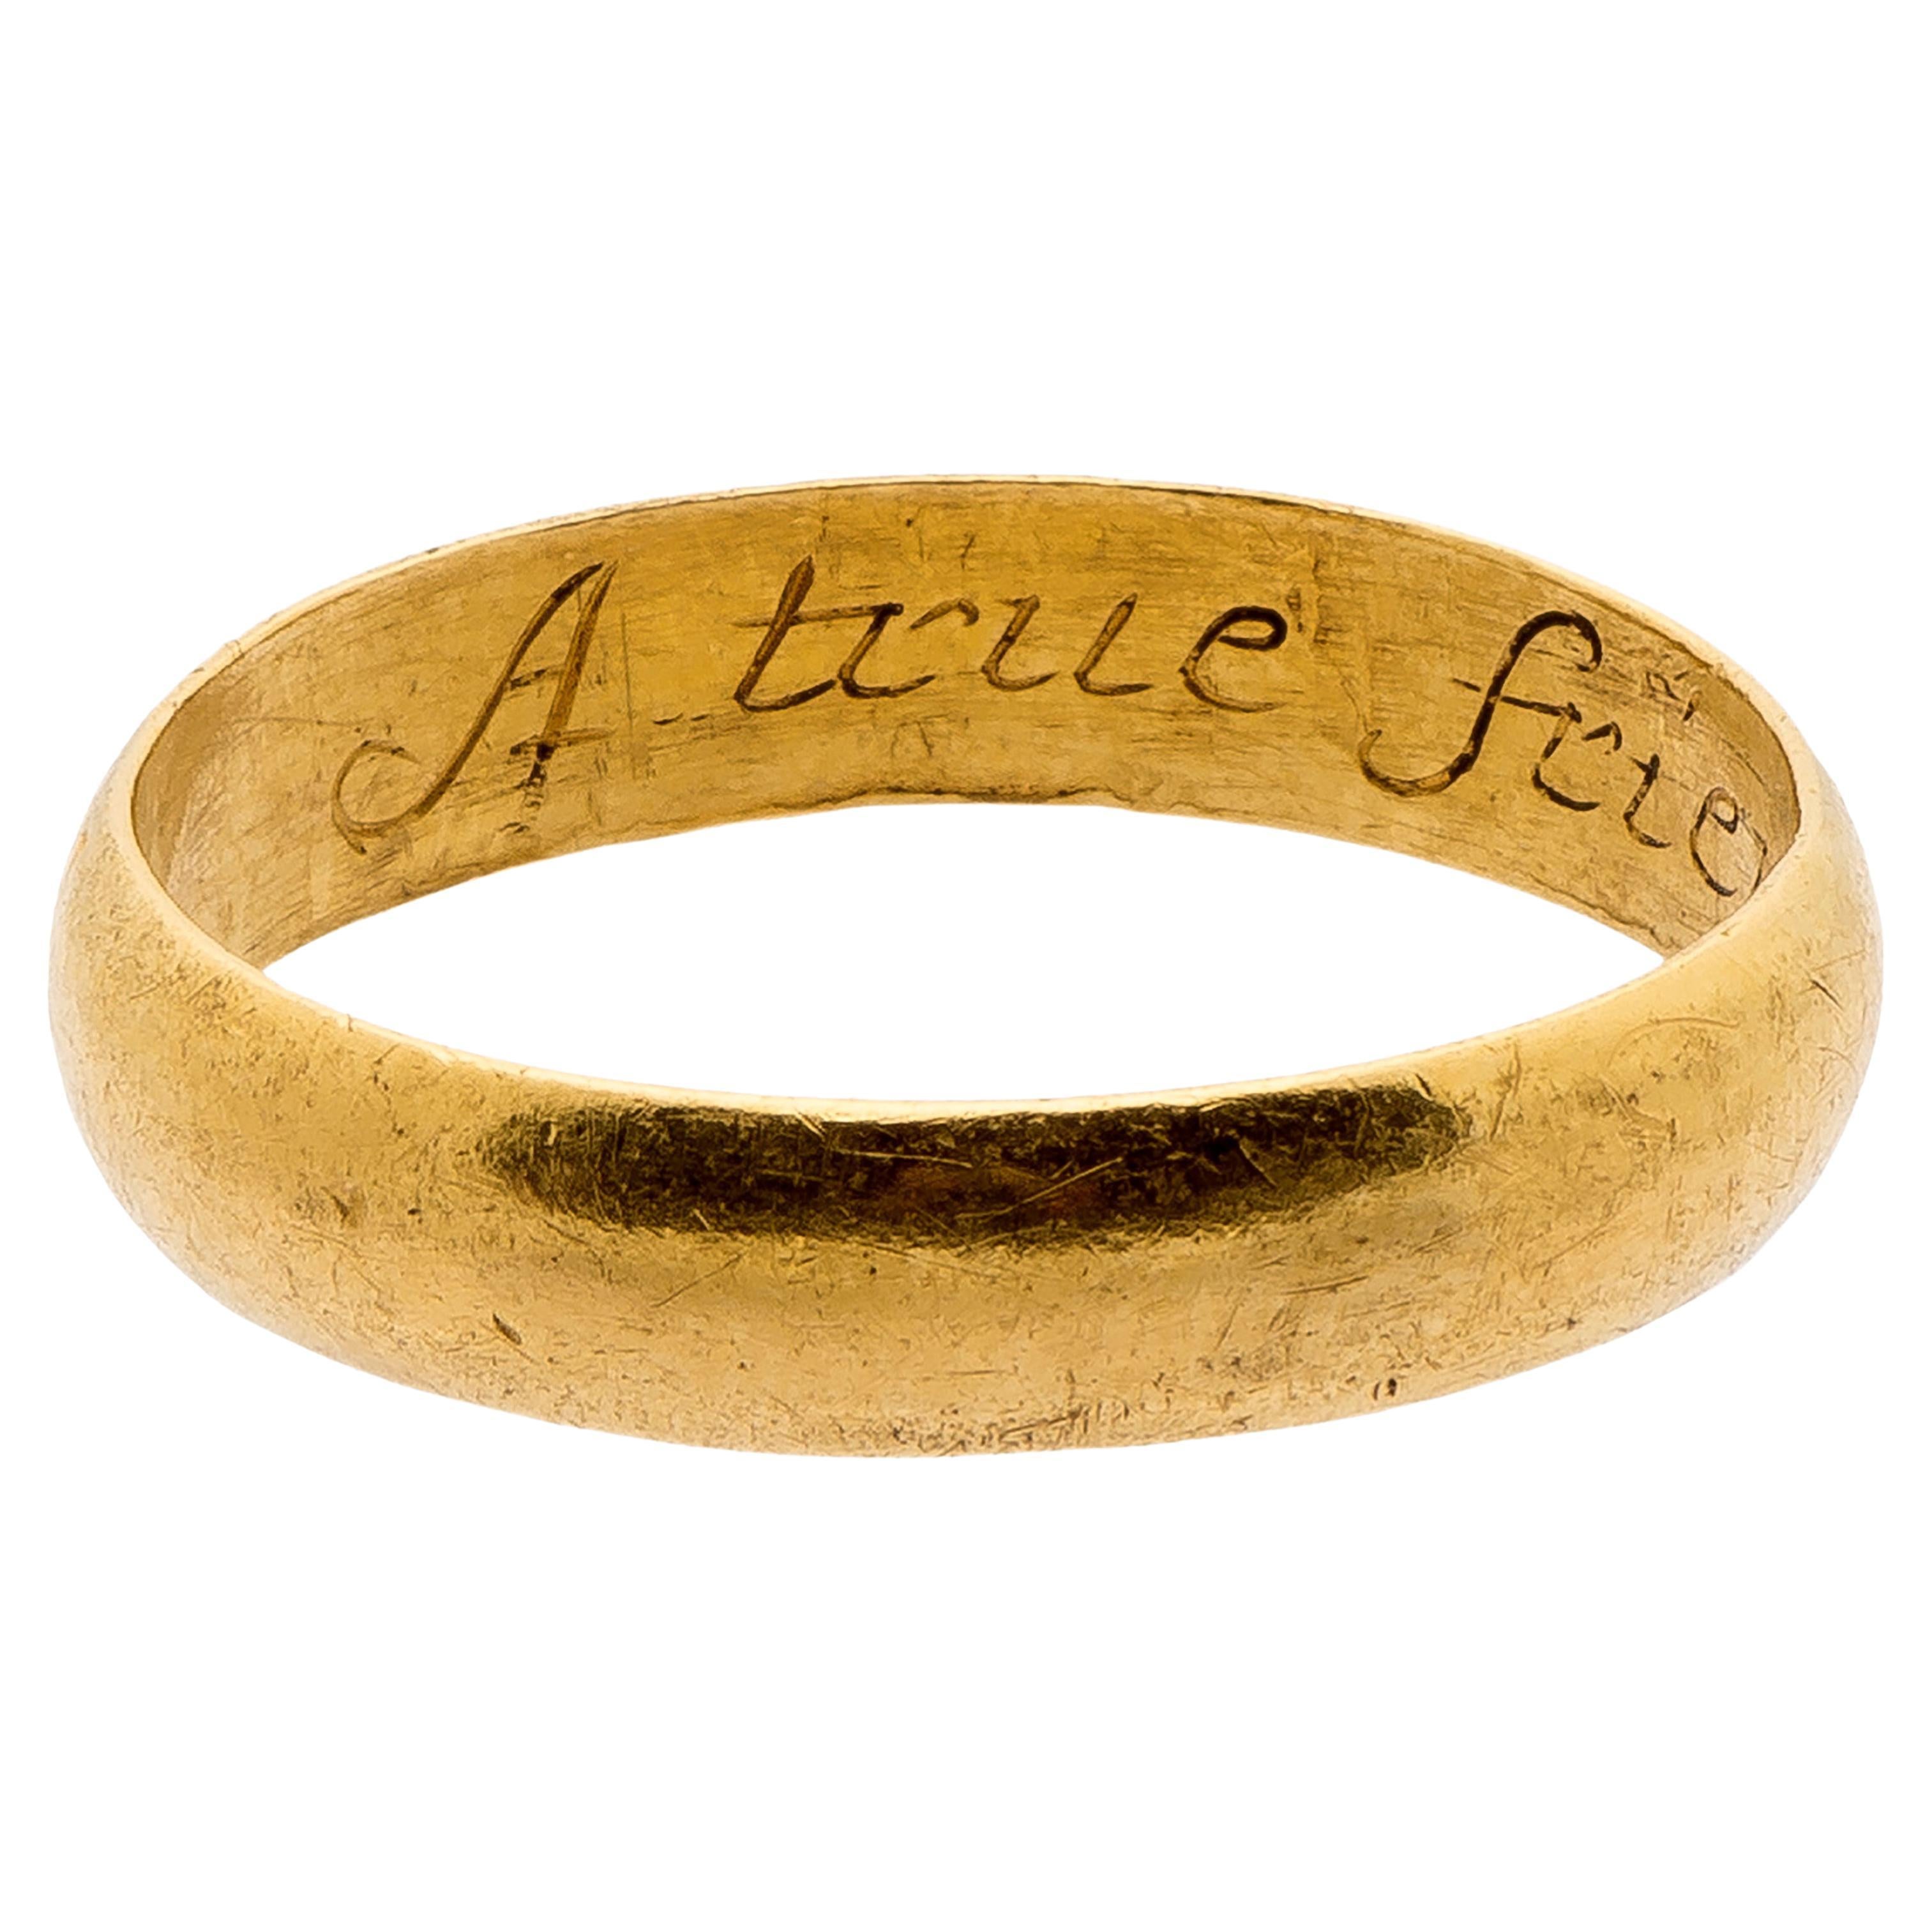 Antique Gold English Band 'Posey' Ring